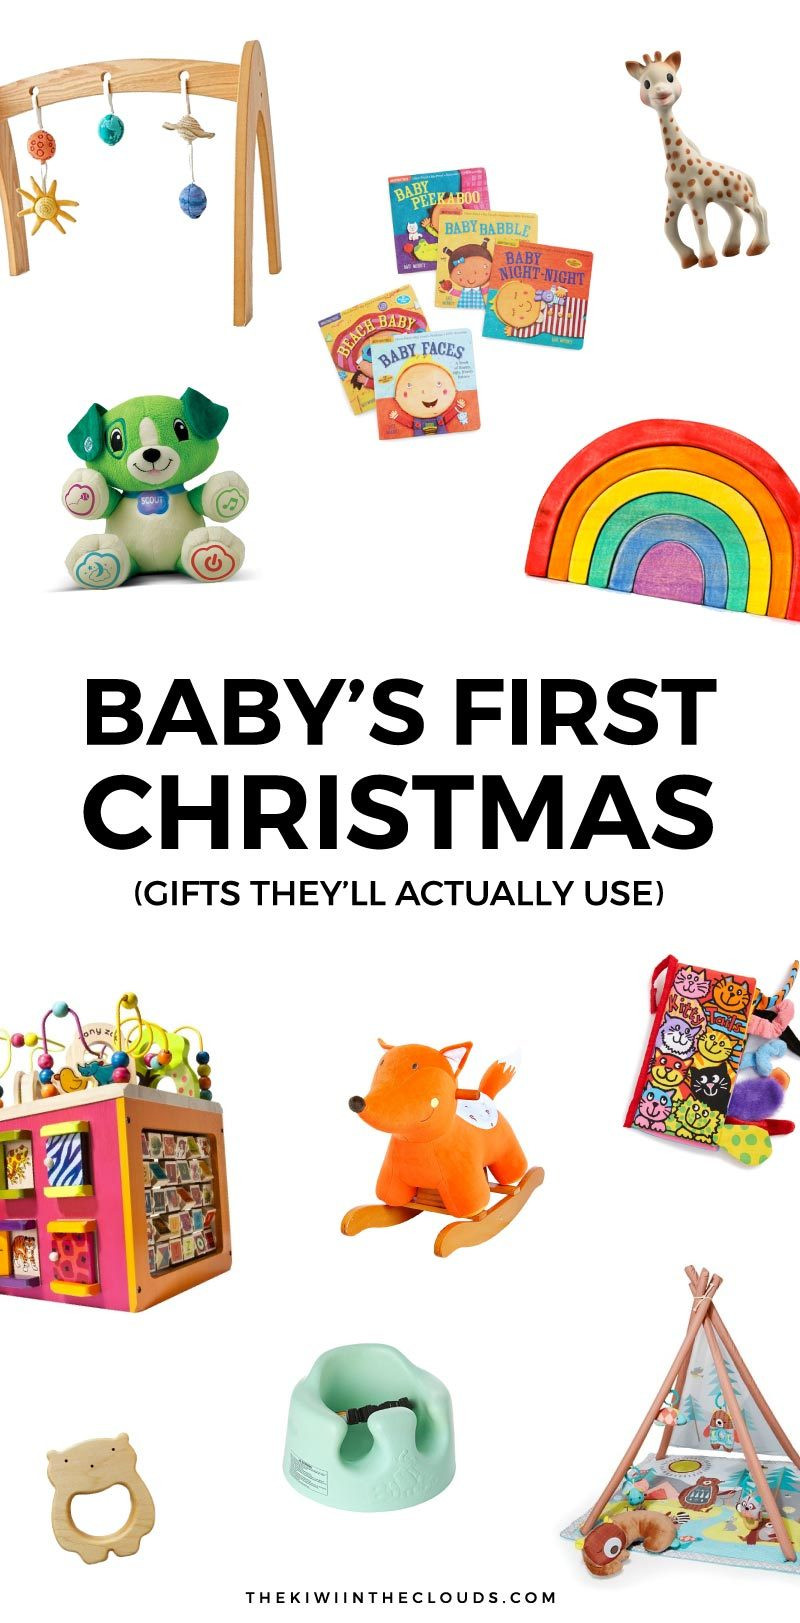 Baby 1St Christmas Gift Ideas
 11 Baby s First Christmas Gifts That Will Actually Get Used